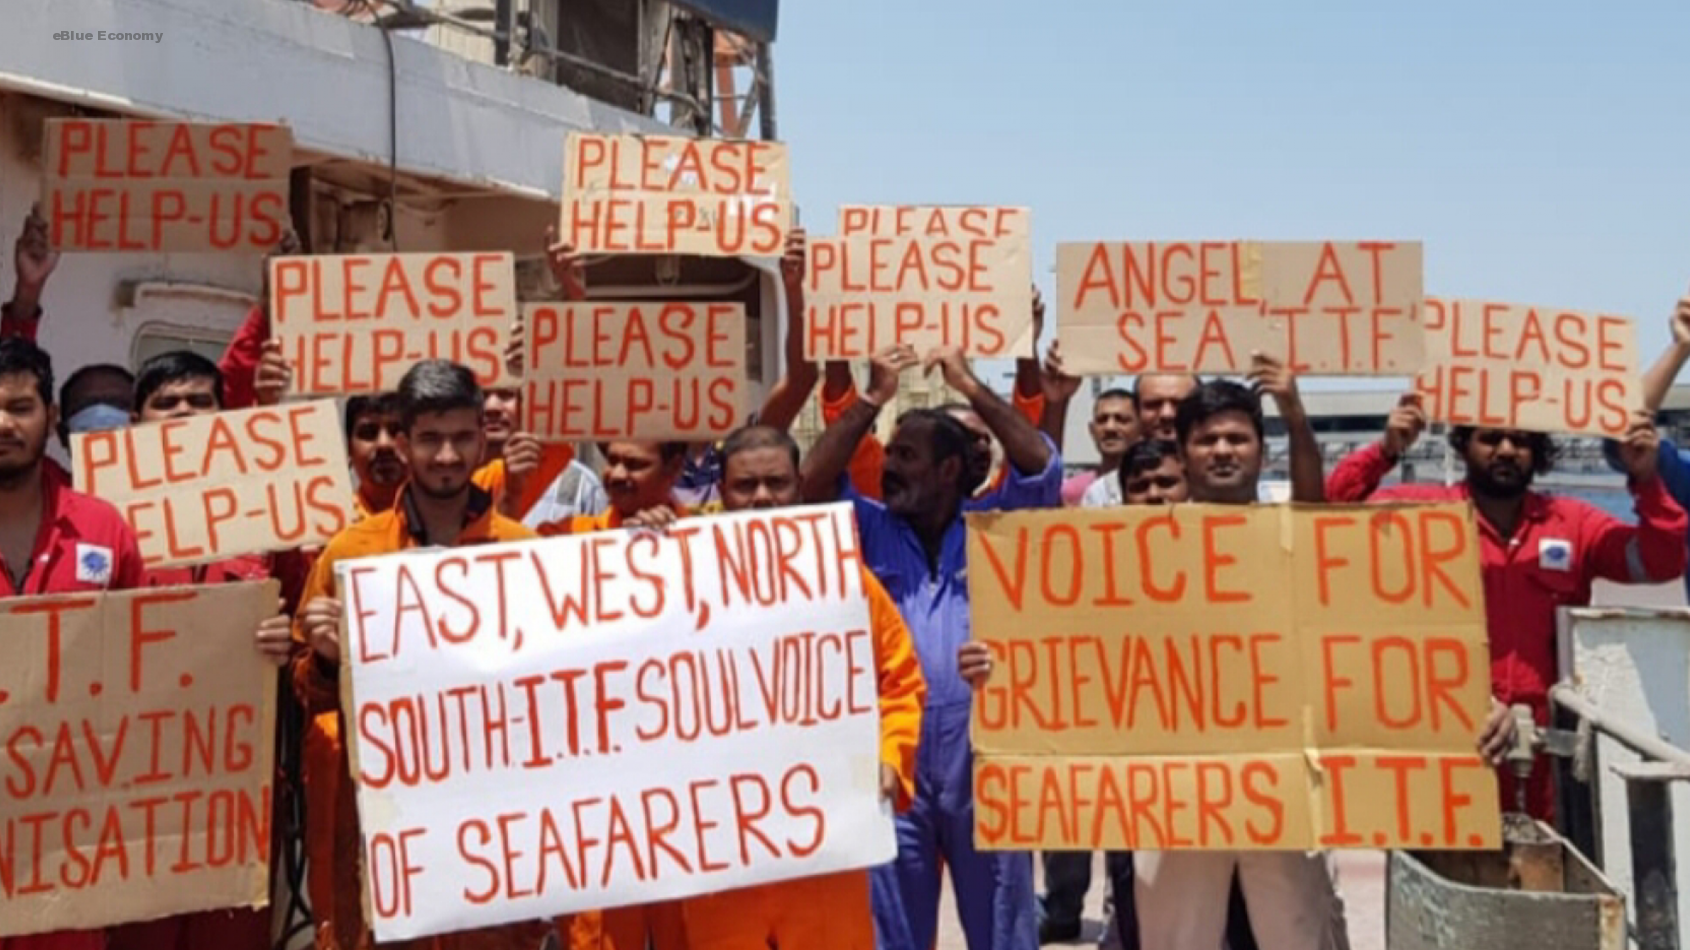 eBlue_economy_ Seafarers on hunger strike, hospitalised in Kuwait to stop families going hungry